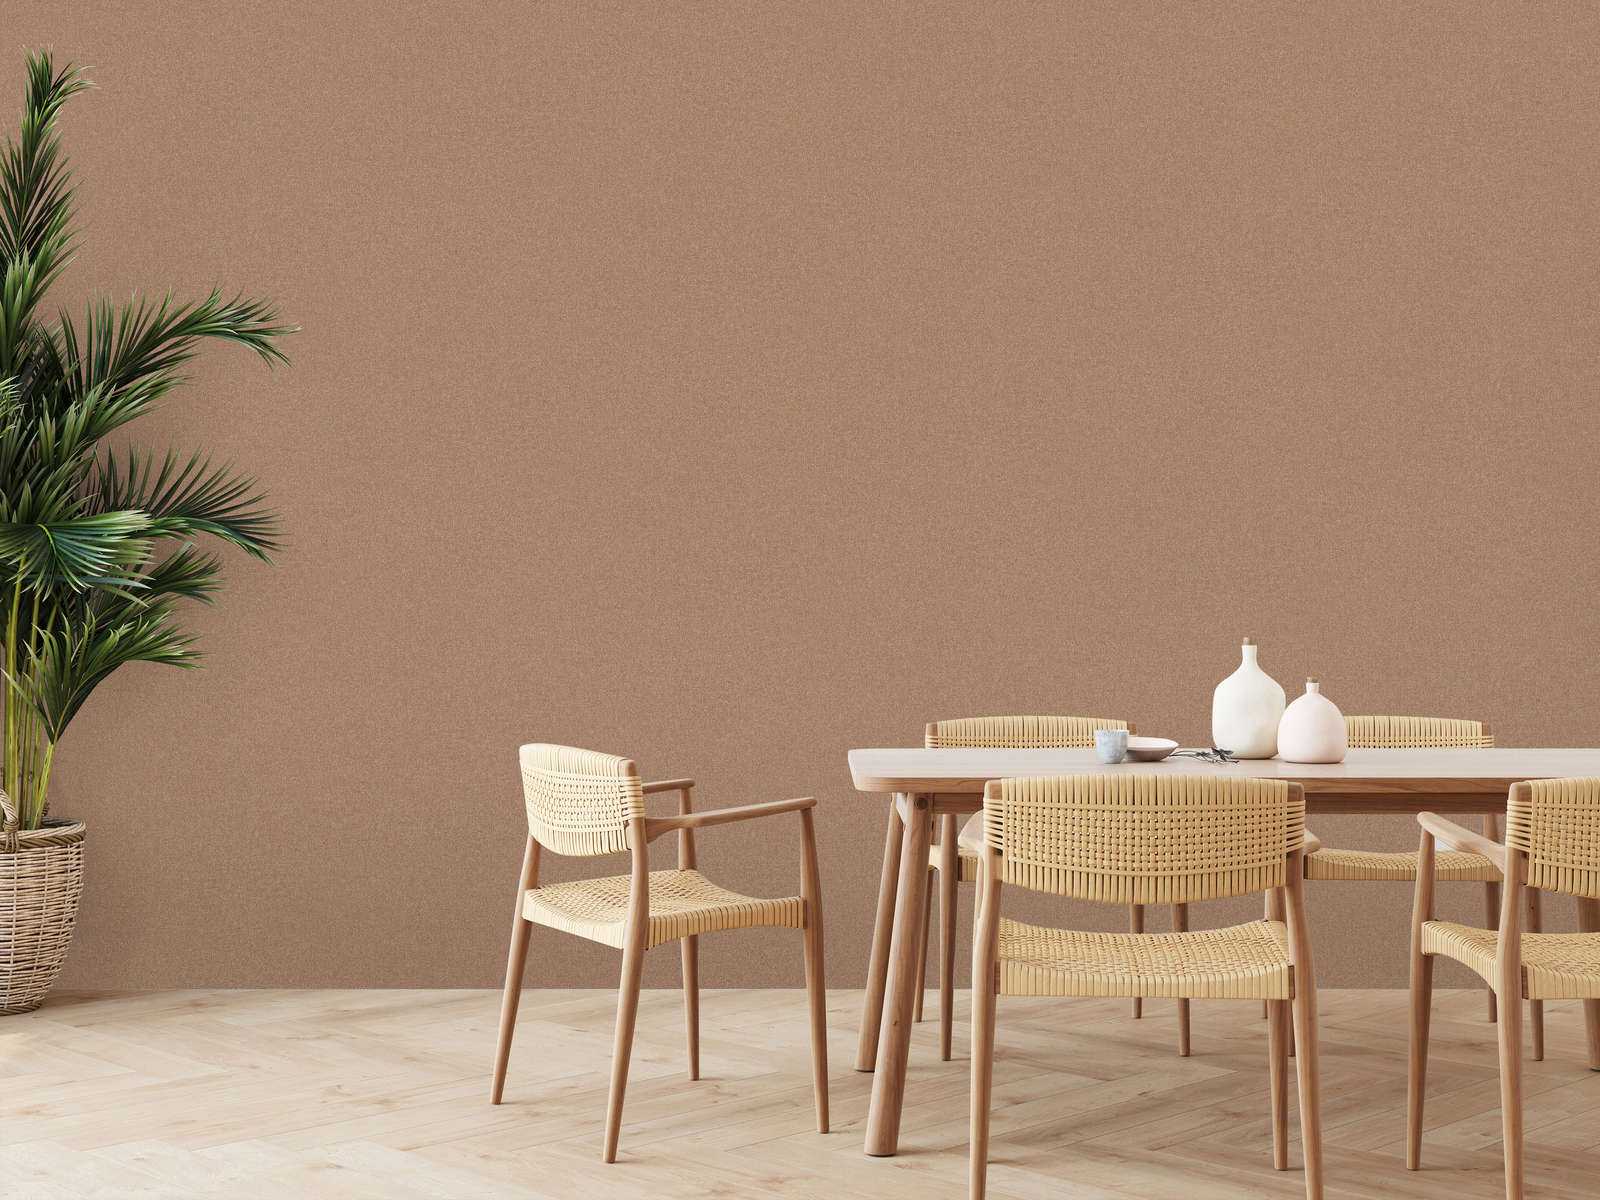             Non-woven wallpaper plains with fine structure - brown
        